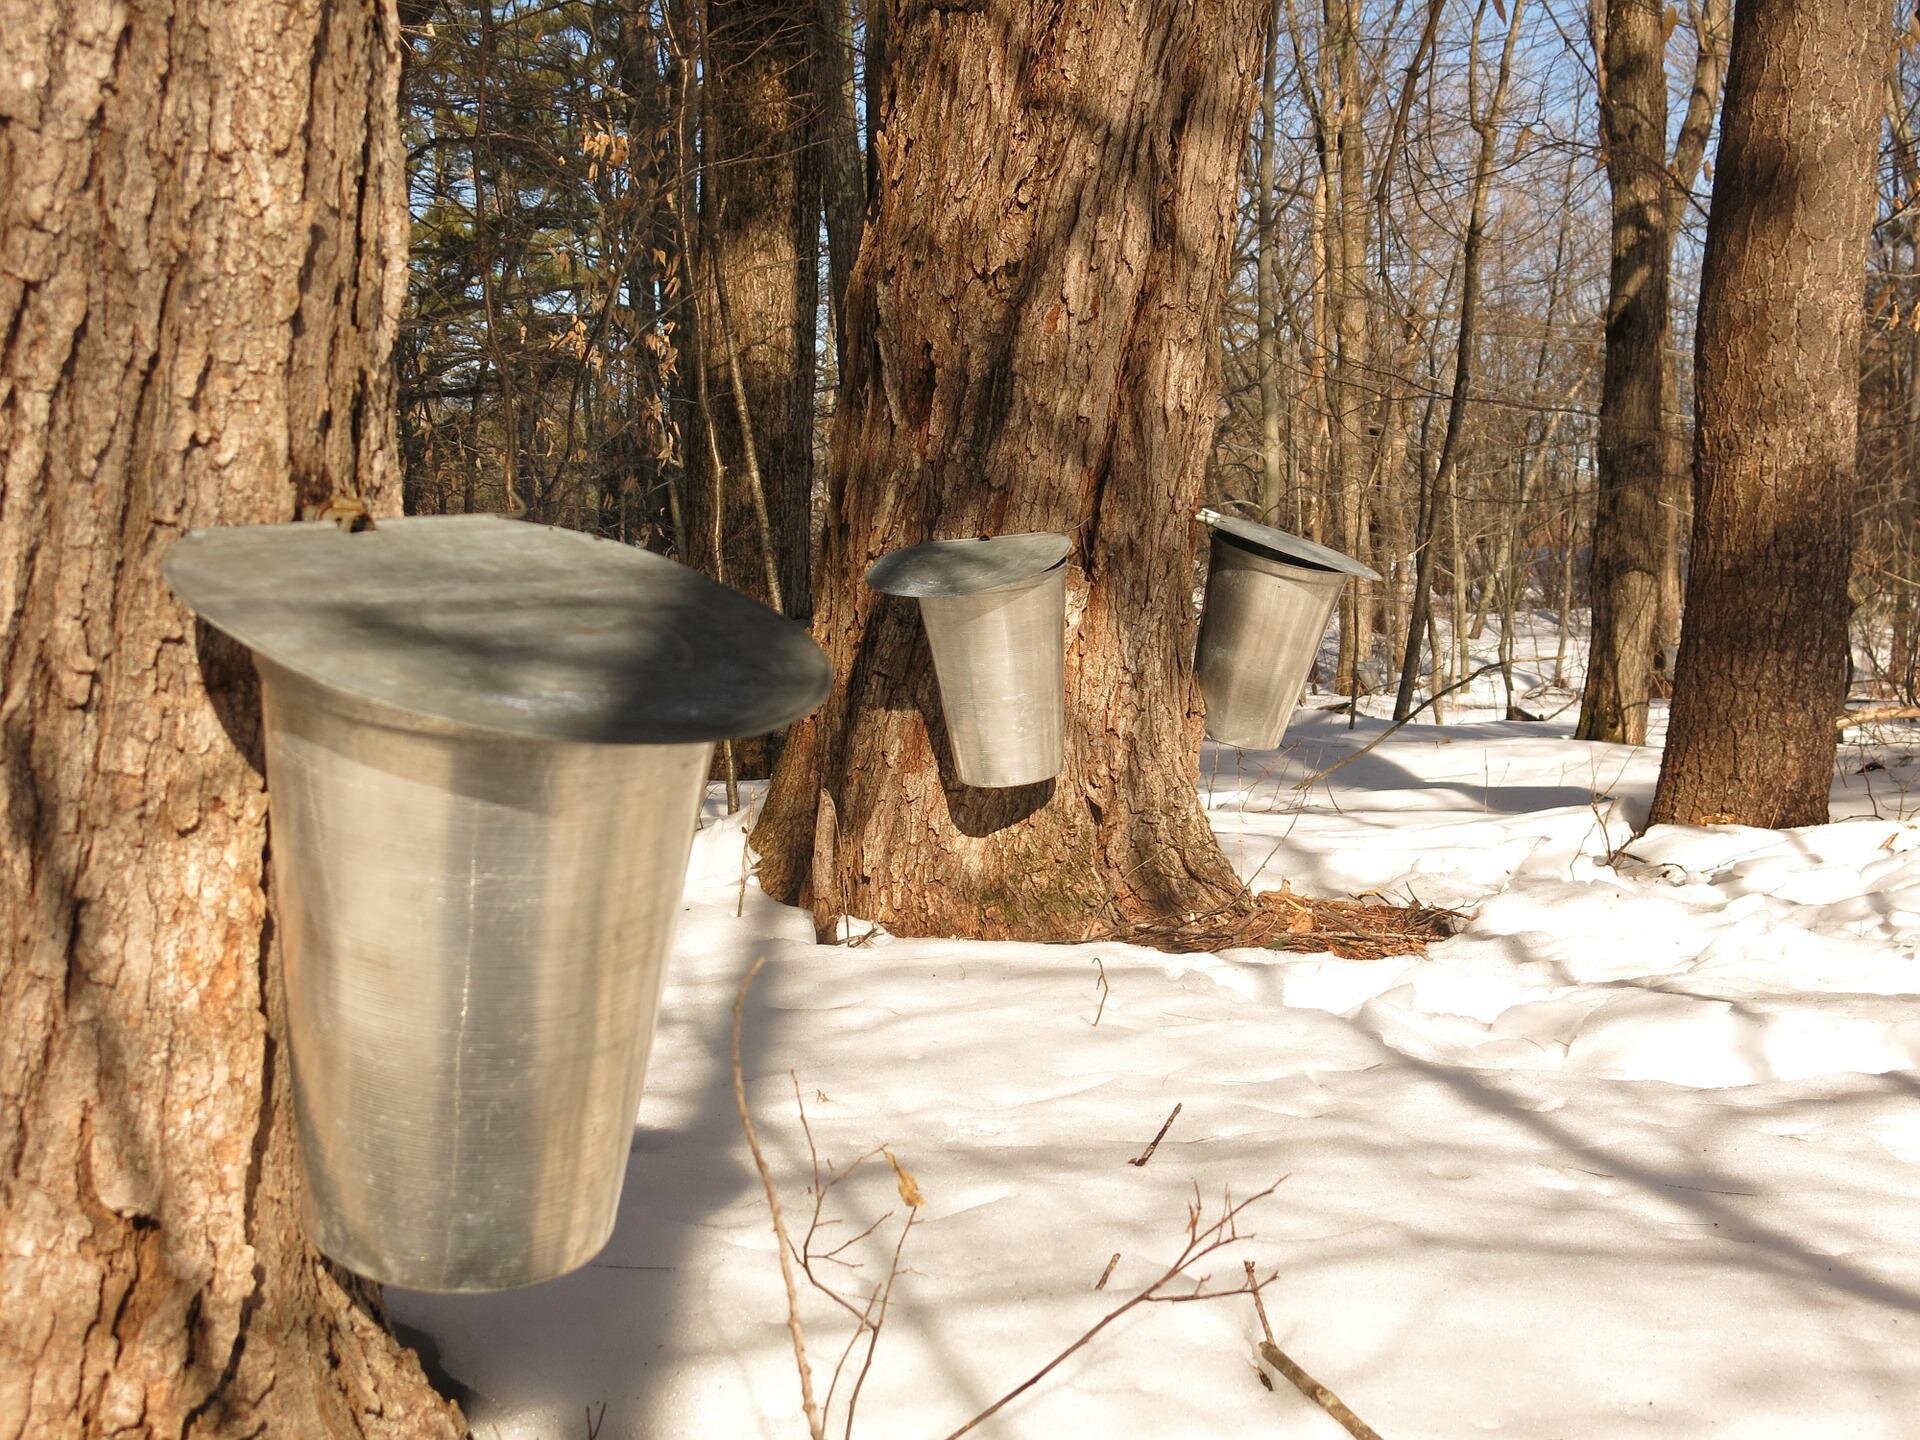 #Climate change means uncertain future for maple trees, syrup season